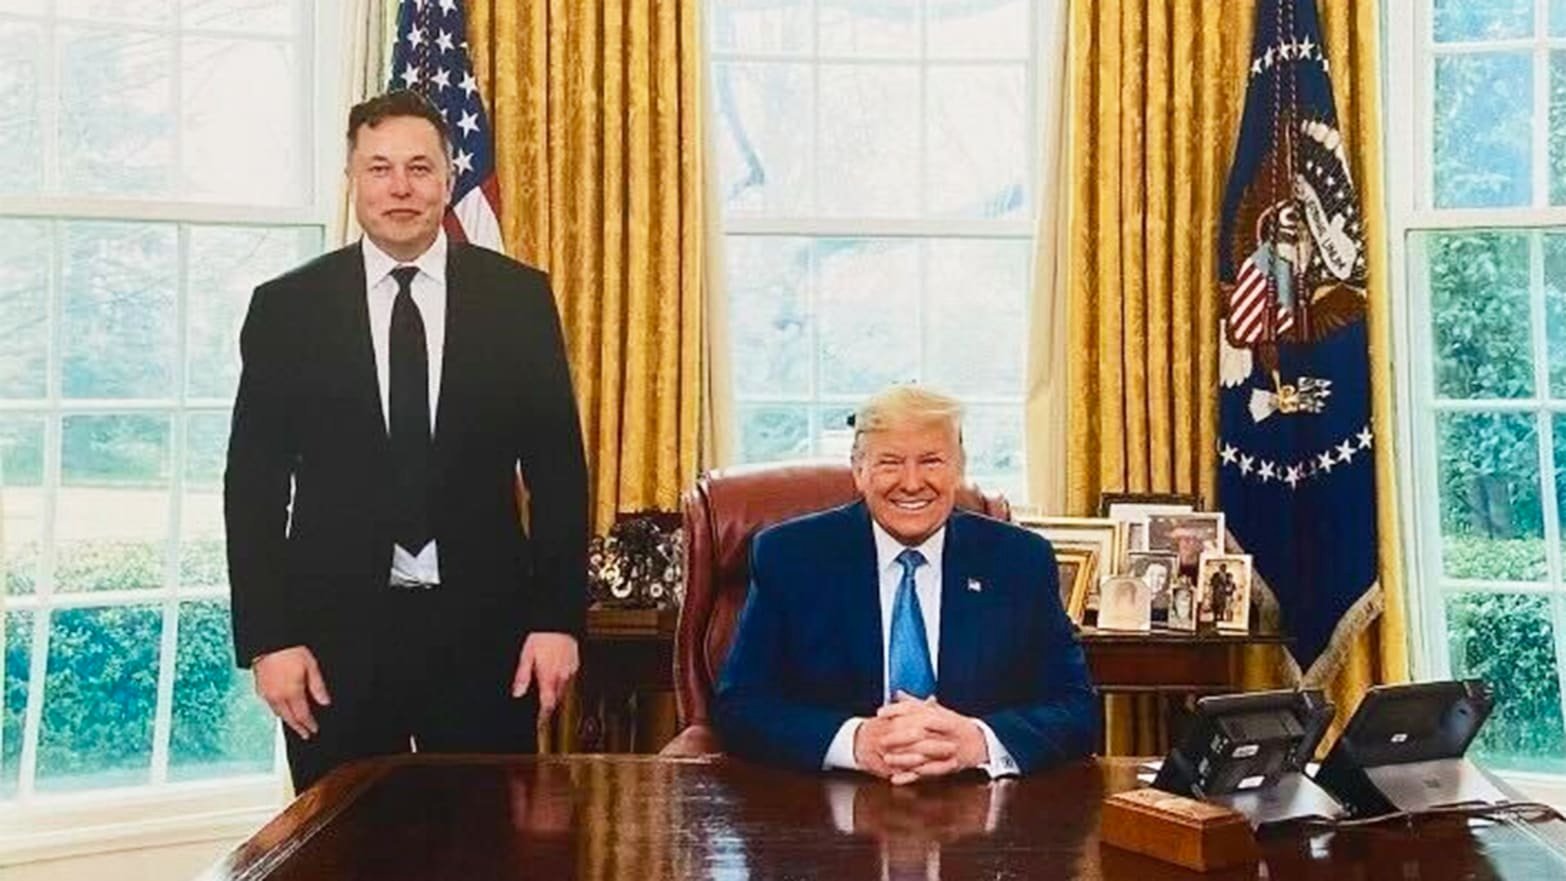 SpaceX CEO Elon Musk is pictured with former US President Donald Trump in the Oval Office. X@elonmusk